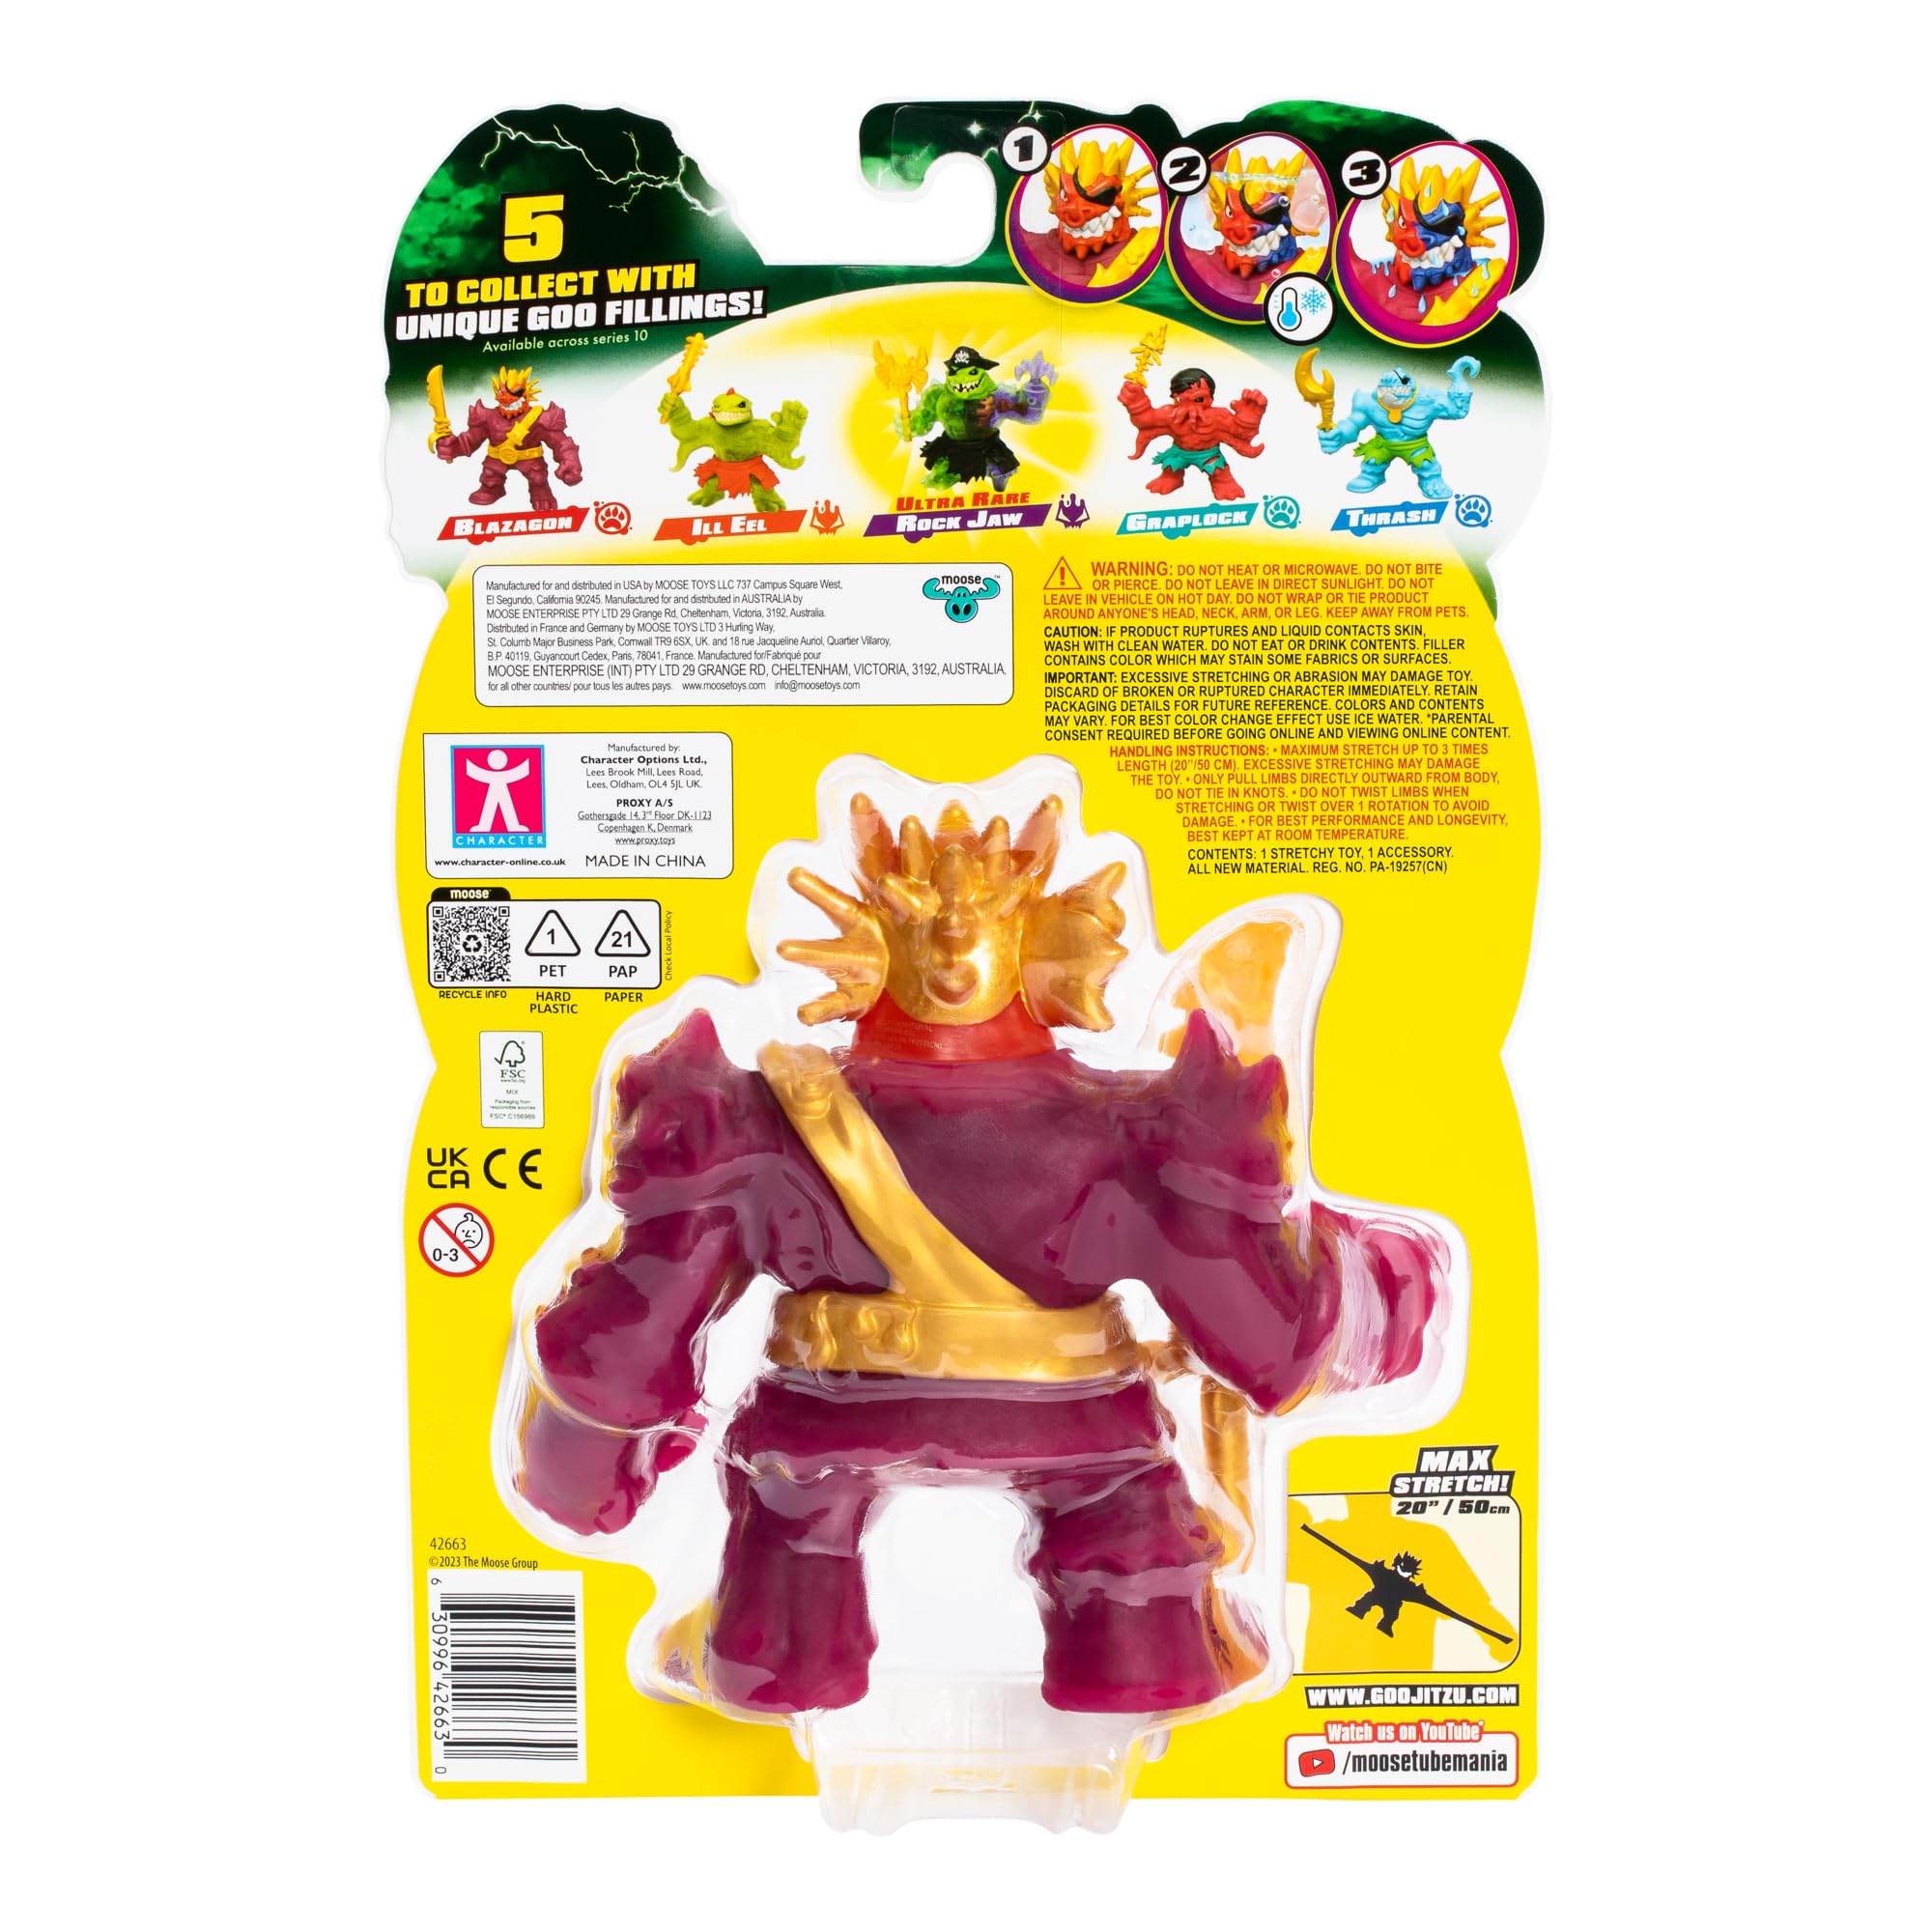 Heroes of Goo Jit Zu Cursed Goo Sea | Super Gooey, Goo Filled Toy Blazagon Action Figure Hero Pack | with Color Changing Face That Reveals His Curse | Stretch Him 3 Times His Size